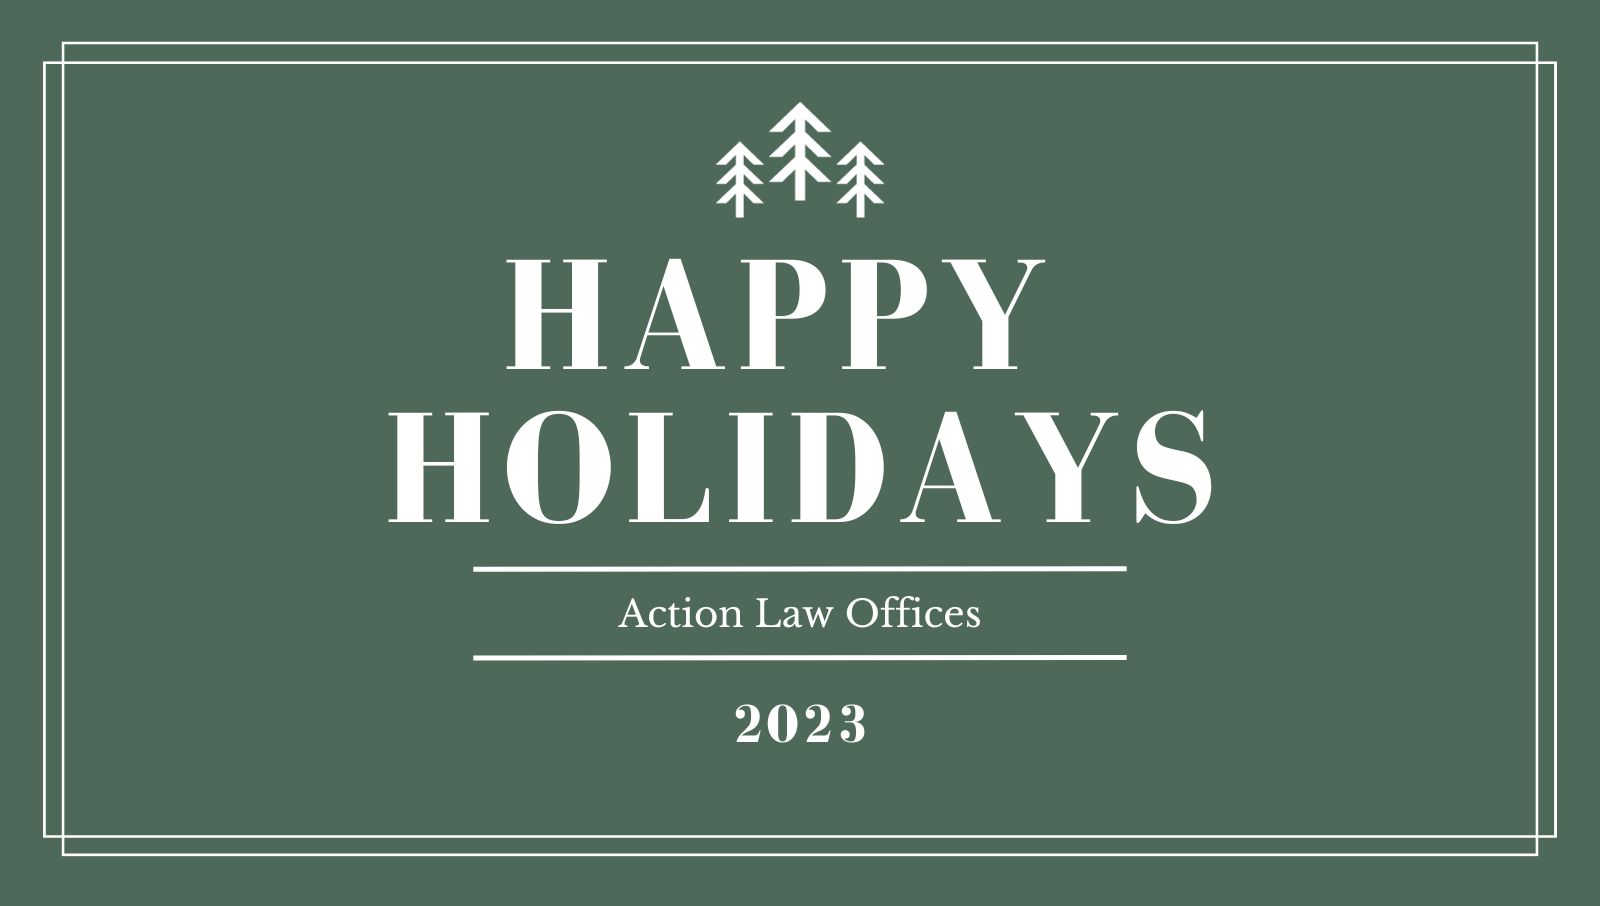 Merry & Bright with Justice in Sight! Action Law Offices: Your Legal Elves for Unexpected Holiday Bumps. Free Consultation!